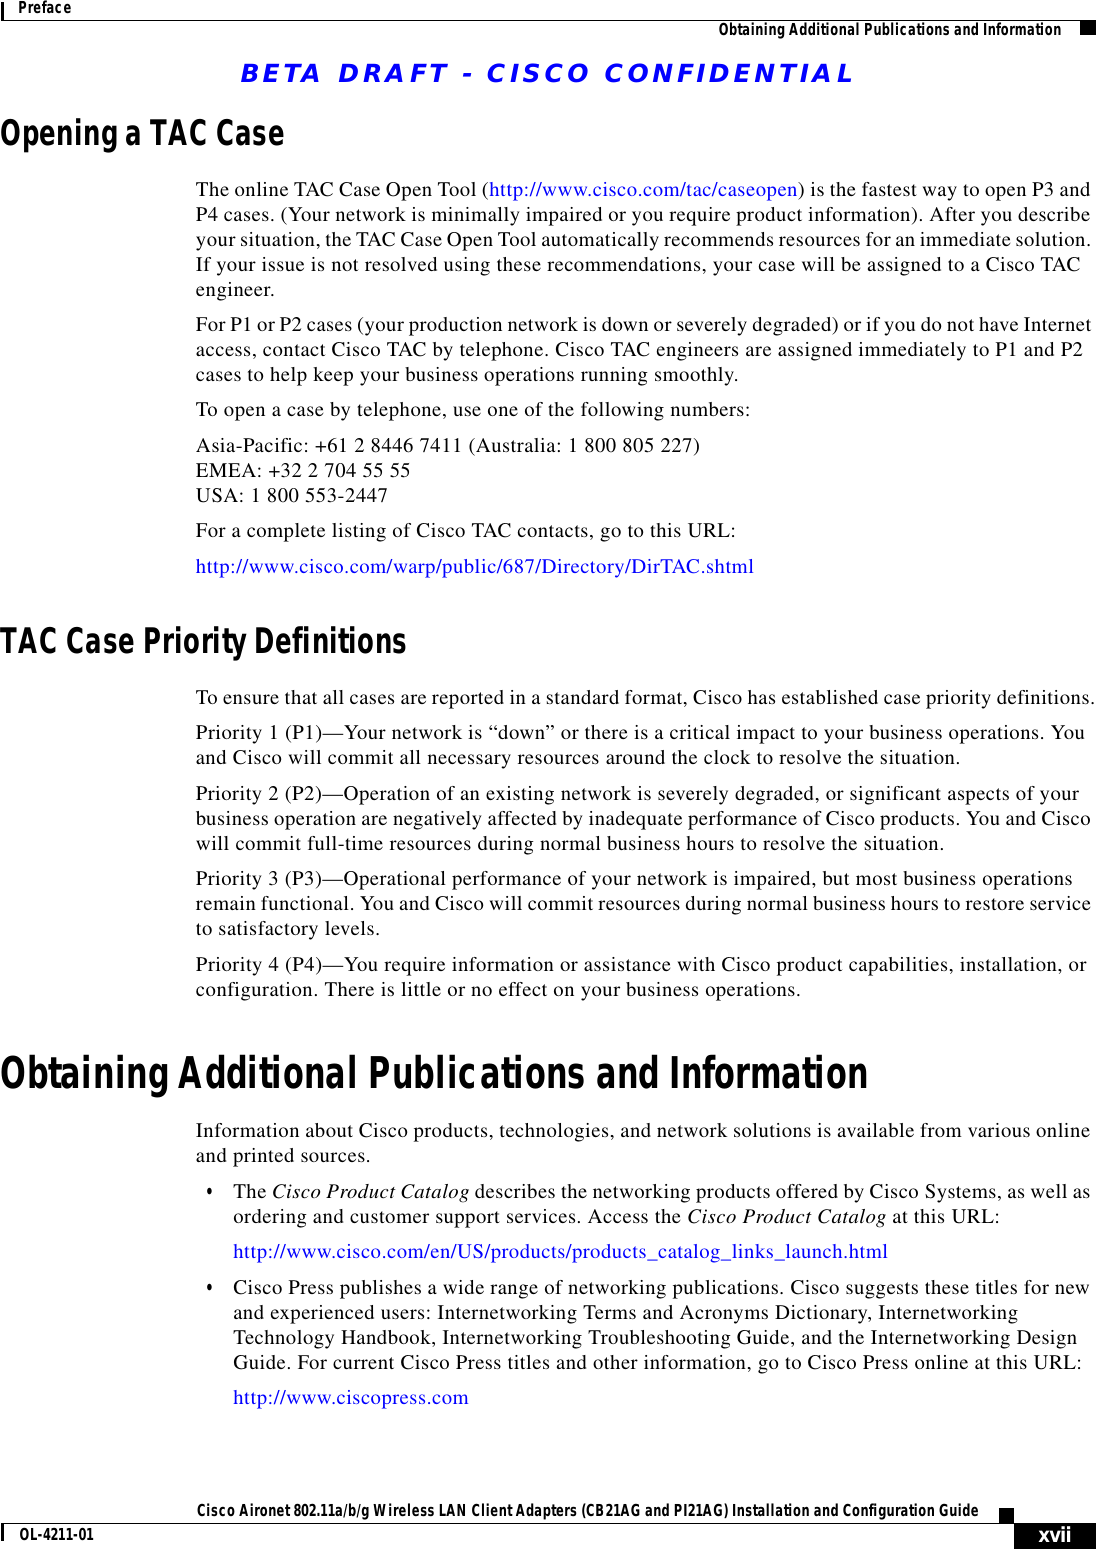 BETA DRAFT - CISCO CONFIDENTIALxviiCisco Aironet 802.11a/b/g Wireless LAN Client Adapters (CB21AG and PI21AG) Installation and Configuration GuideOL-4211-01Preface Obtaining Additional Publications and InformationOpening a TAC CaseThe online TAC Case Open Tool (http://www.cisco.com/tac/caseopen) is the fastest way to open P3 and P4 cases. (Your network is minimally impaired or you require product information). After you describe your situation, the TAC Case Open Tool automatically recommends resources for an immediate solution. If your issue is not resolved using these recommendations, your case will be assigned to a Cisco TAC engineer.For P1 or P2 cases (your production network is down or severely degraded) or if you do not have Internet access, contact Cisco TAC by telephone. Cisco TAC engineers are assigned immediately to P1 and P2 cases to help keep your business operations running smoothly.To open a case by telephone, use one of the following numbers:Asia-Pacific: +61 2 8446 7411 (Australia: 1 800 805 227) EMEA: +32 2 704 55 55 USA: 1 800 553-2447 For a complete listing of Cisco TAC contacts, go to this URL:http://www.cisco.com/warp/public/687/Directory/DirTAC.shtmlTAC Case Priority DefinitionsTo ensure that all cases are reported in a standard format, Cisco has established case priority definitions.Priority 1 (P1)—Your network is “down” or there is a critical impact to your business operations. You and Cisco will commit all necessary resources around the clock to resolve the situation. Priority 2 (P2)—Operation of an existing network is severely degraded, or significant aspects of your business operation are negatively affected by inadequate performance of Cisco products. You and Cisco will commit full-time resources during normal business hours to resolve the situation.Priority 3 (P3)—Operational performance of your network is impaired, but most business operations remain functional. You and Cisco will commit resources during normal business hours to restore service to satisfactory levels.Priority 4 (P4)—You require information or assistance with Cisco product capabilities, installation, or configuration. There is little or no effect on your business operations.Obtaining Additional Publications and InformationInformation about Cisco products, technologies, and network solutions is available from various online and printed sources.•The Cisco Product Catalog describes the networking products offered by Cisco Systems, as well as ordering and customer support services. Access the Cisco Product Catalog at this URL:http://www.cisco.com/en/US/products/products_catalog_links_launch.html•Cisco Press publishes a wide range of networking publications. Cisco suggests these titles for new and experienced users: Internetworking Terms and Acronyms Dictionary, Internetworking Technology Handbook, Internetworking Troubleshooting Guide, and the Internetworking Design Guide. For current Cisco Press titles and other information, go to Cisco Press online at this URL:http://www.ciscopress.com